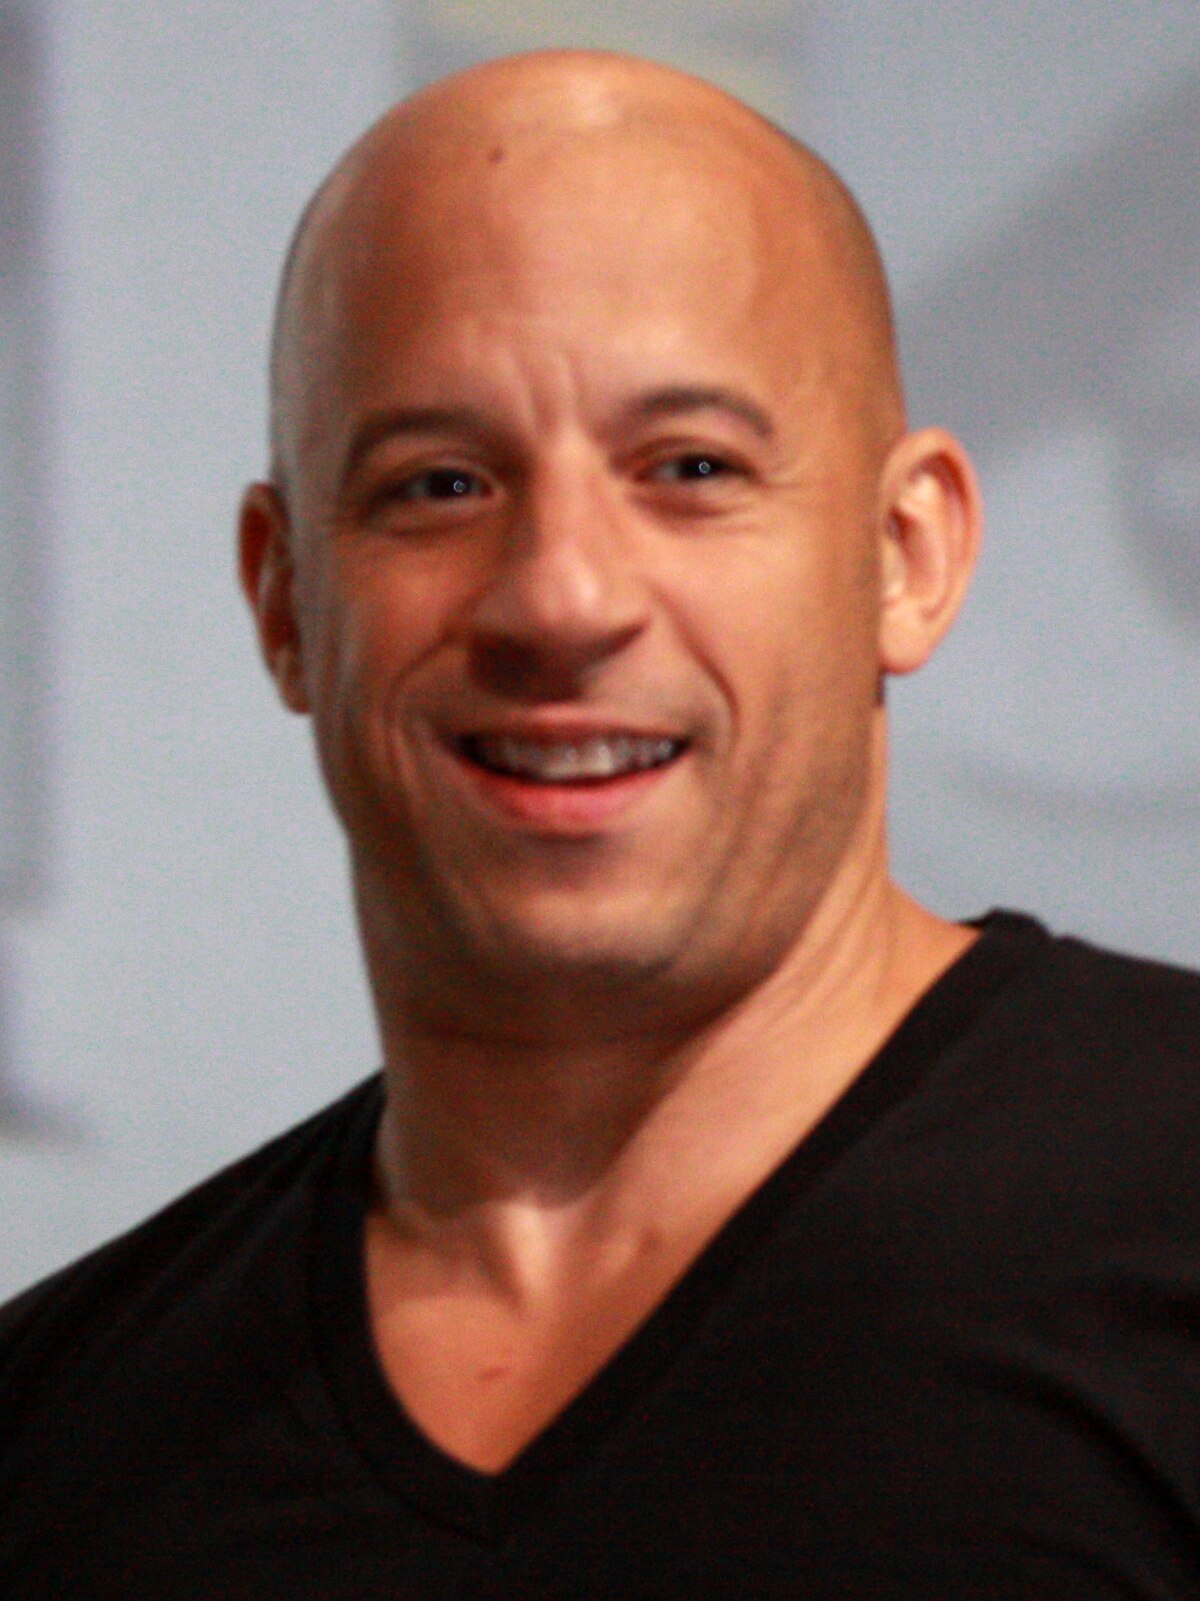 vin diesel and his twin brother